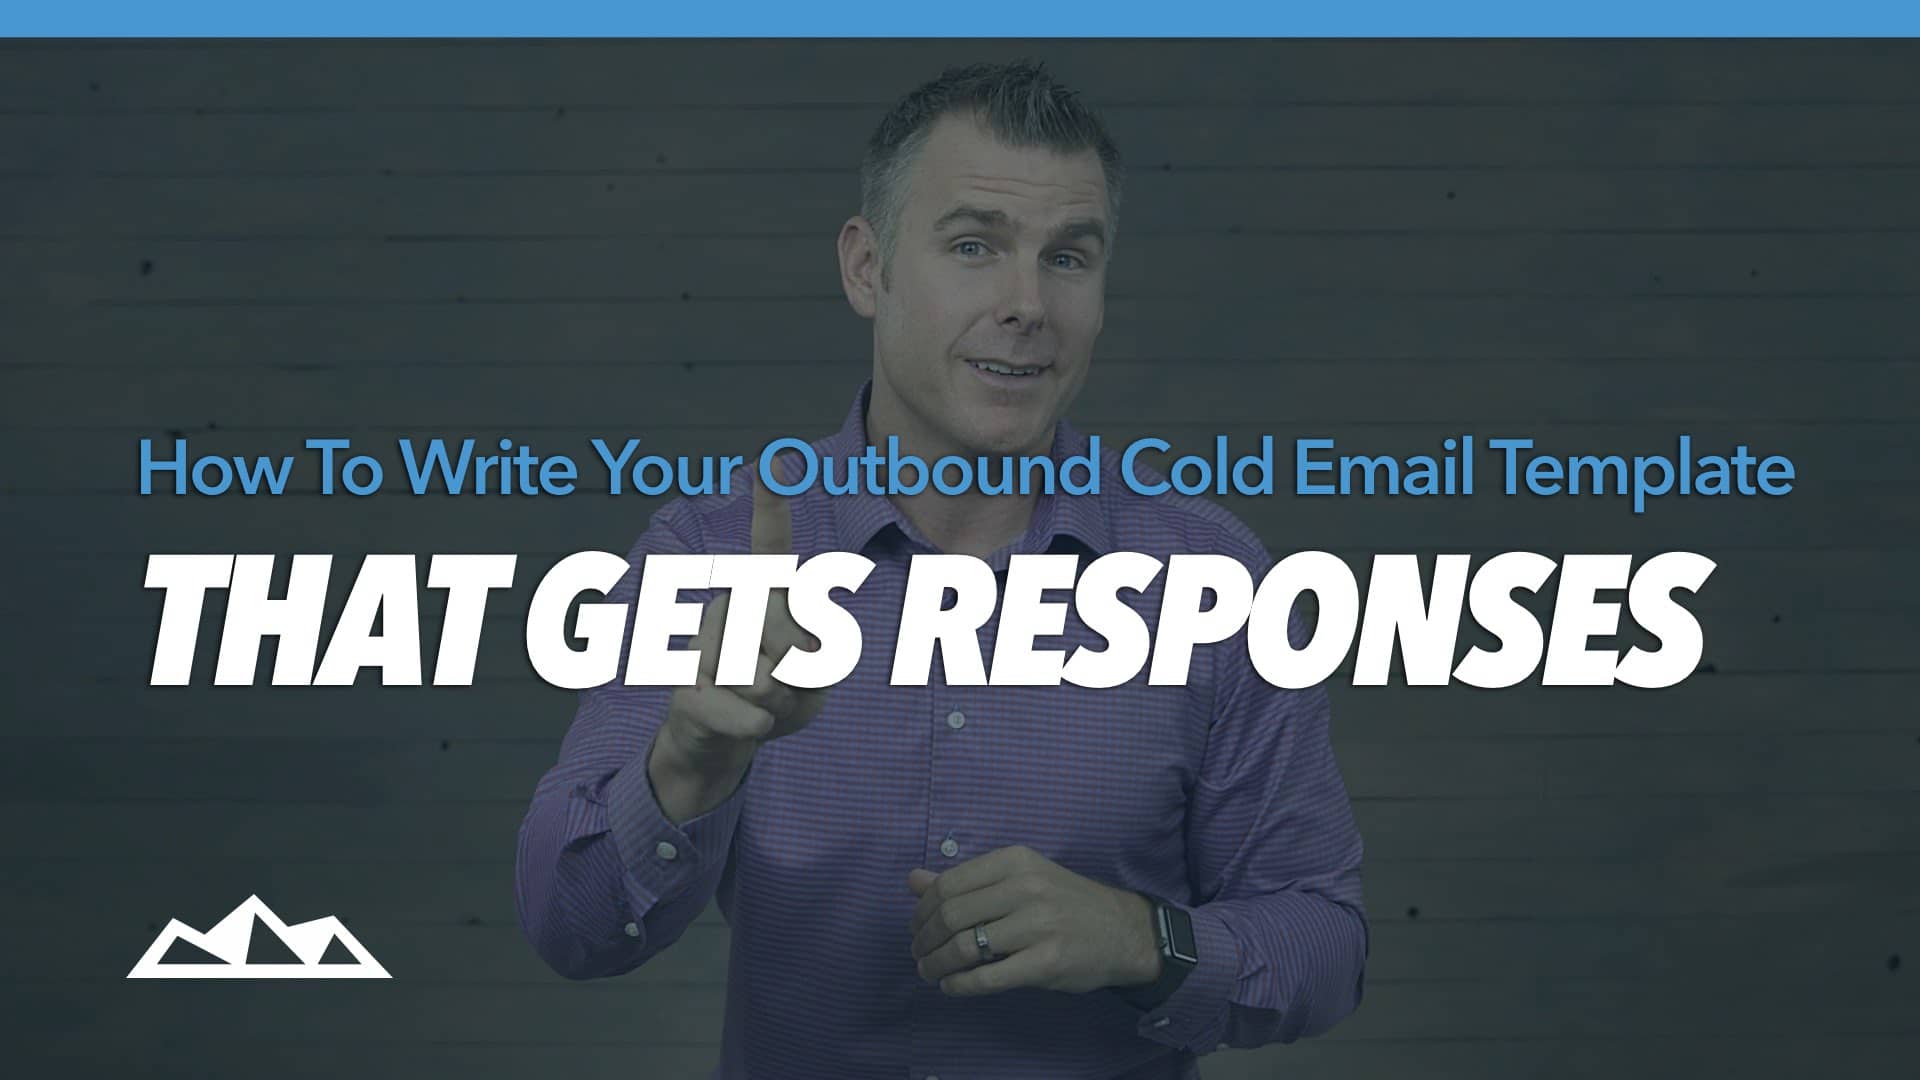 Use This 4 Part Framework To Write Cold Emails That Actually Get a Response